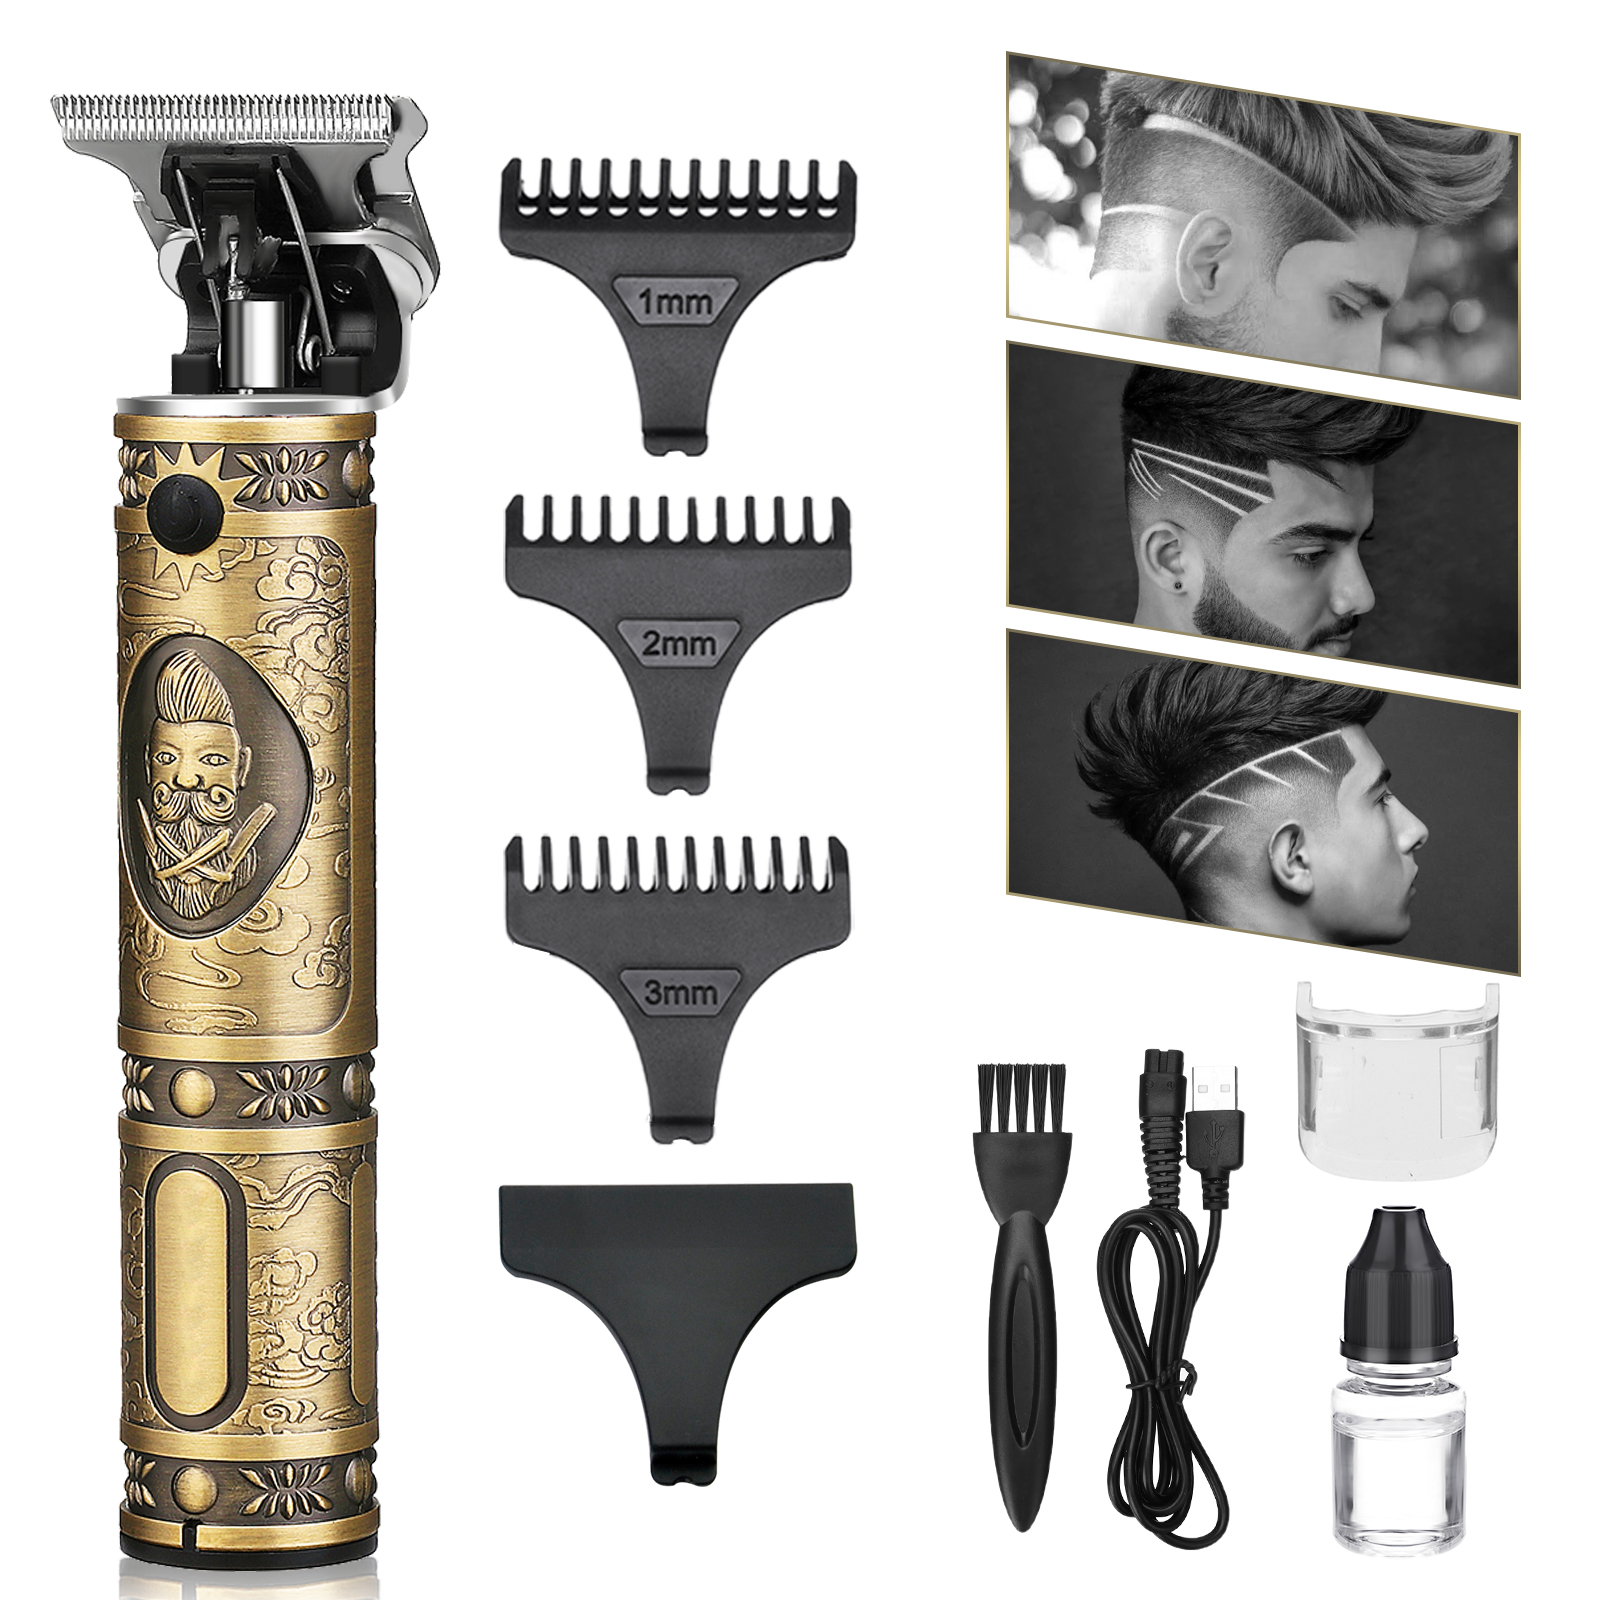 GLAMADOR-Electric-Hair-Clipper-USB-Fast-Charging-Beard-Trimmer-Kit-Portable-Low-Noise-Men-Grooming-Cutting-Kit